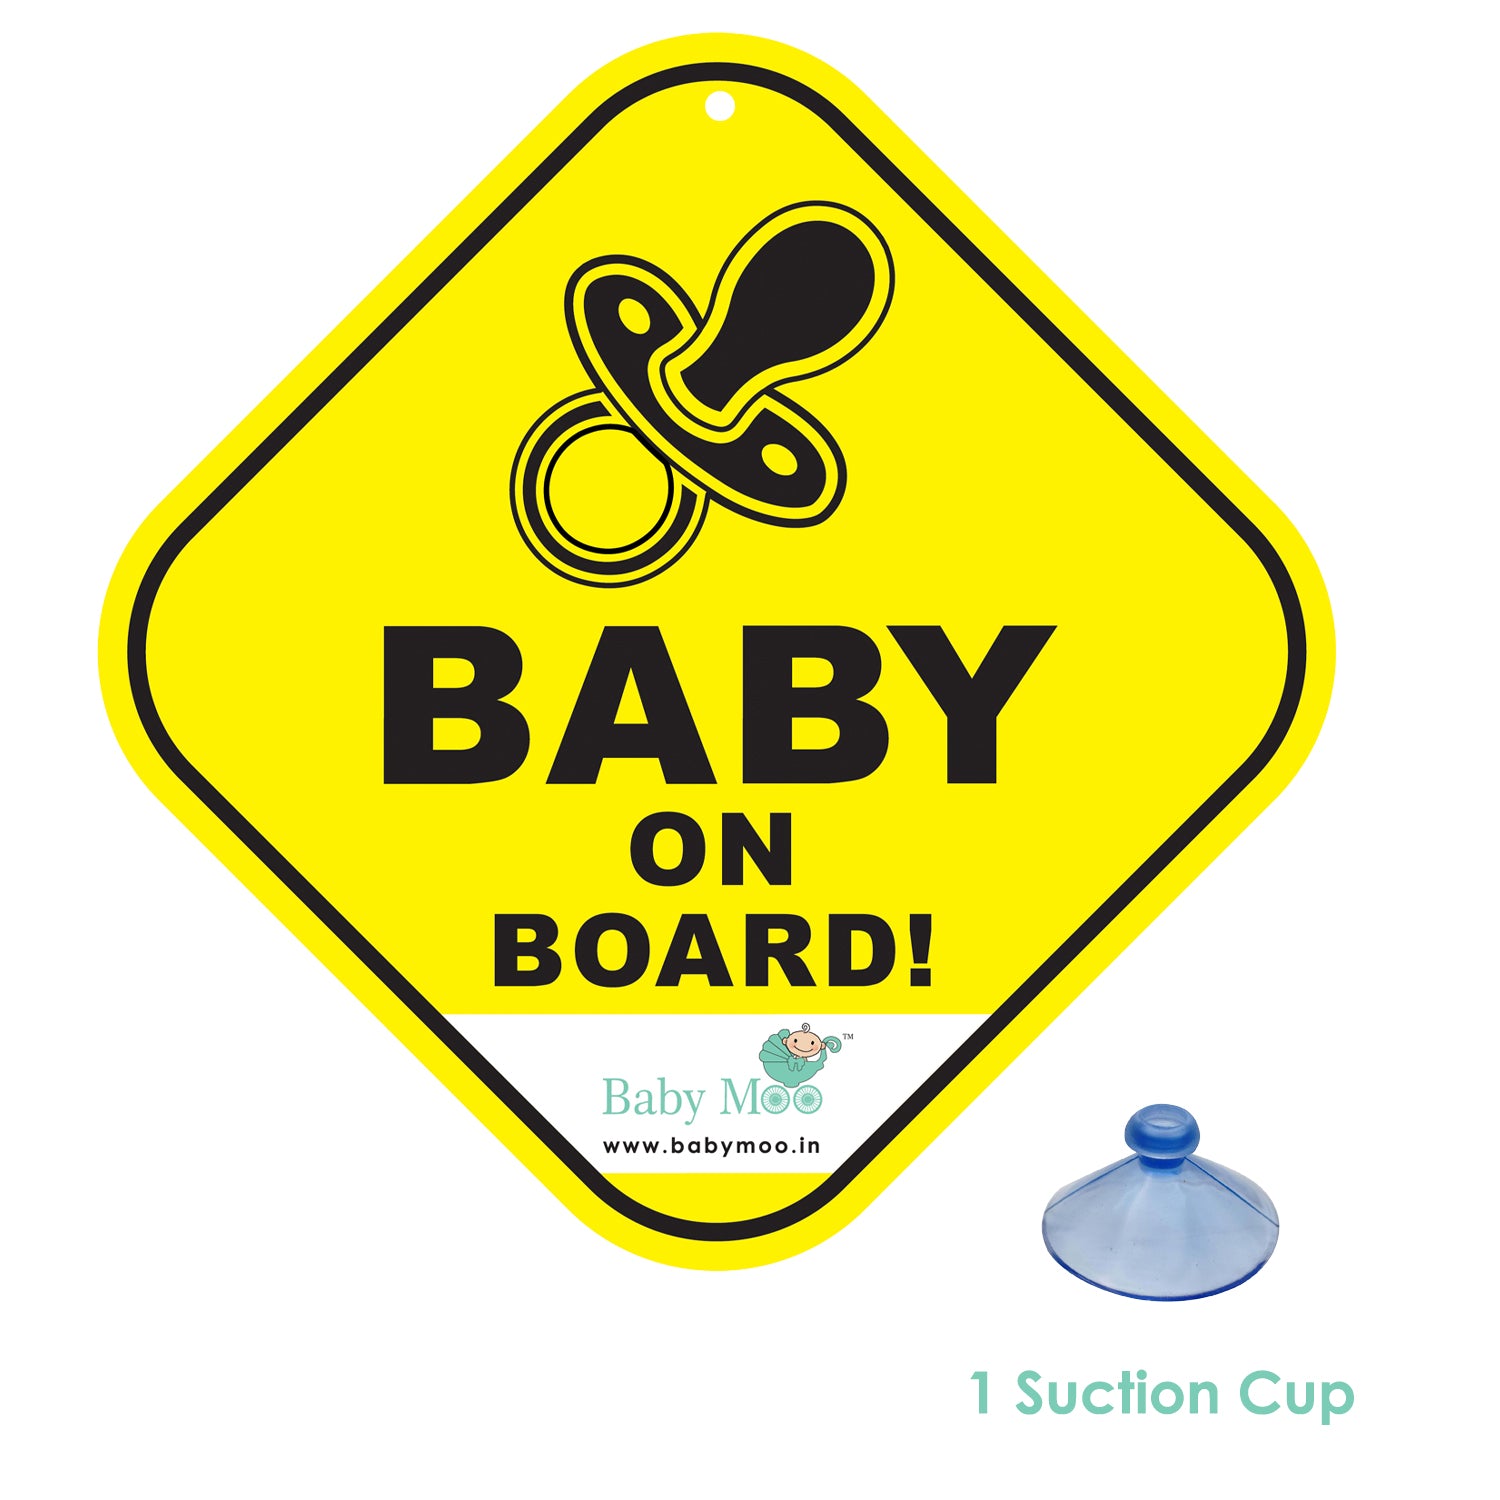 Baby Moo Tiny Infant on Board Car Safety Sign With Vacuum Suction Cup Clip - Yellow